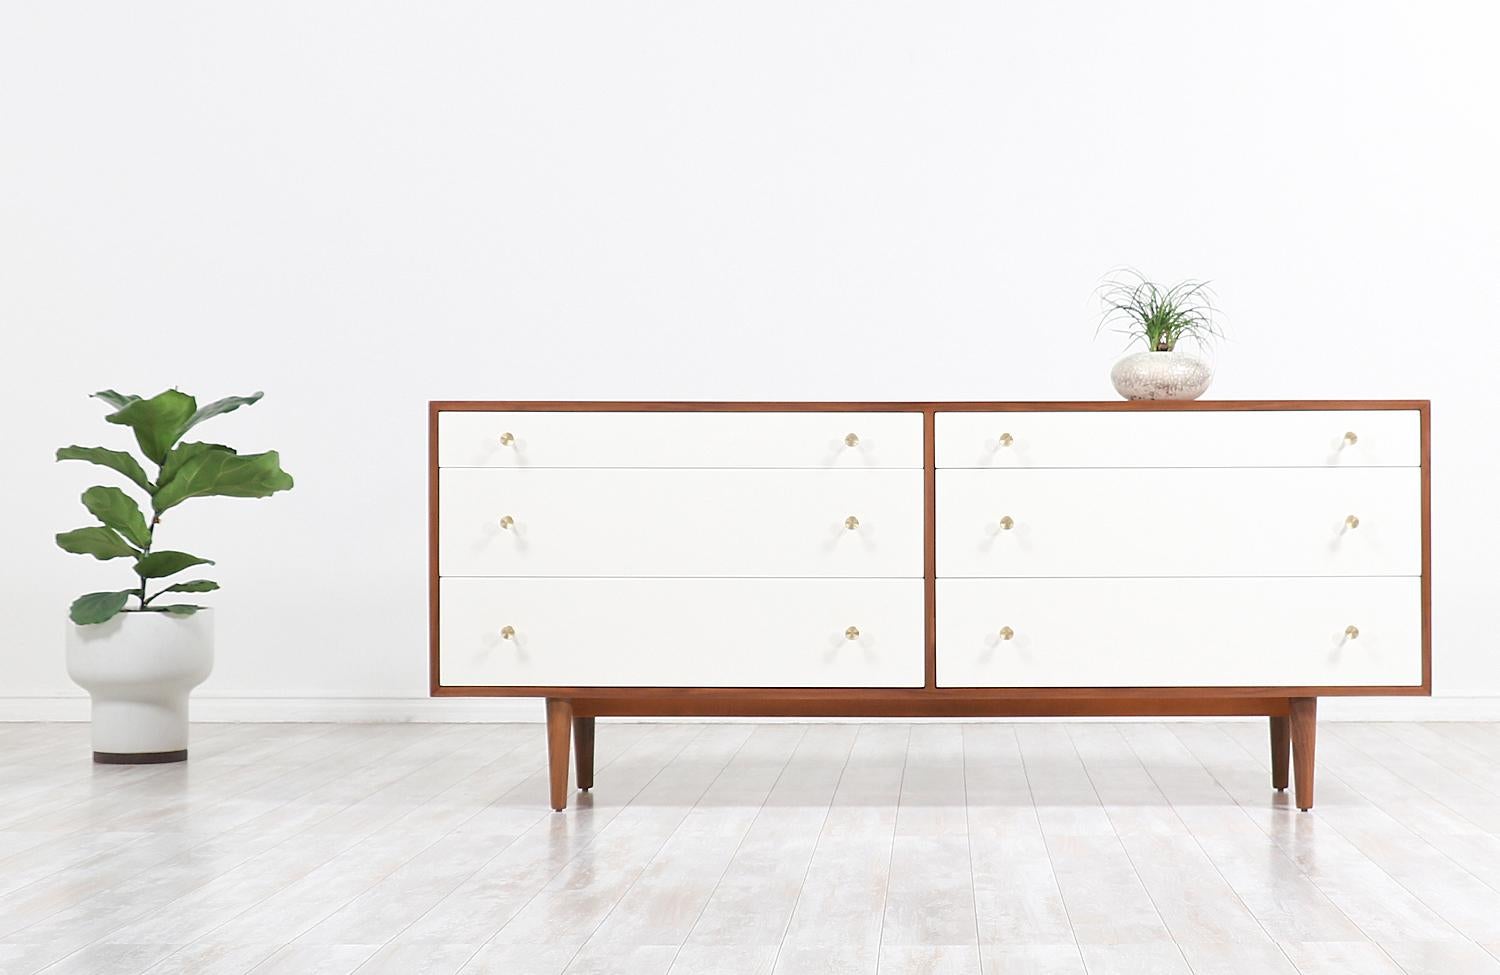 Handsome Mid-Century Modern dresser designed by Milo Baughman for Glenn of California in the United States, circa 1950s. This marvelous dresser features a sturdy walnut wood case with six ample drawers that create a dynamic structure as they come in